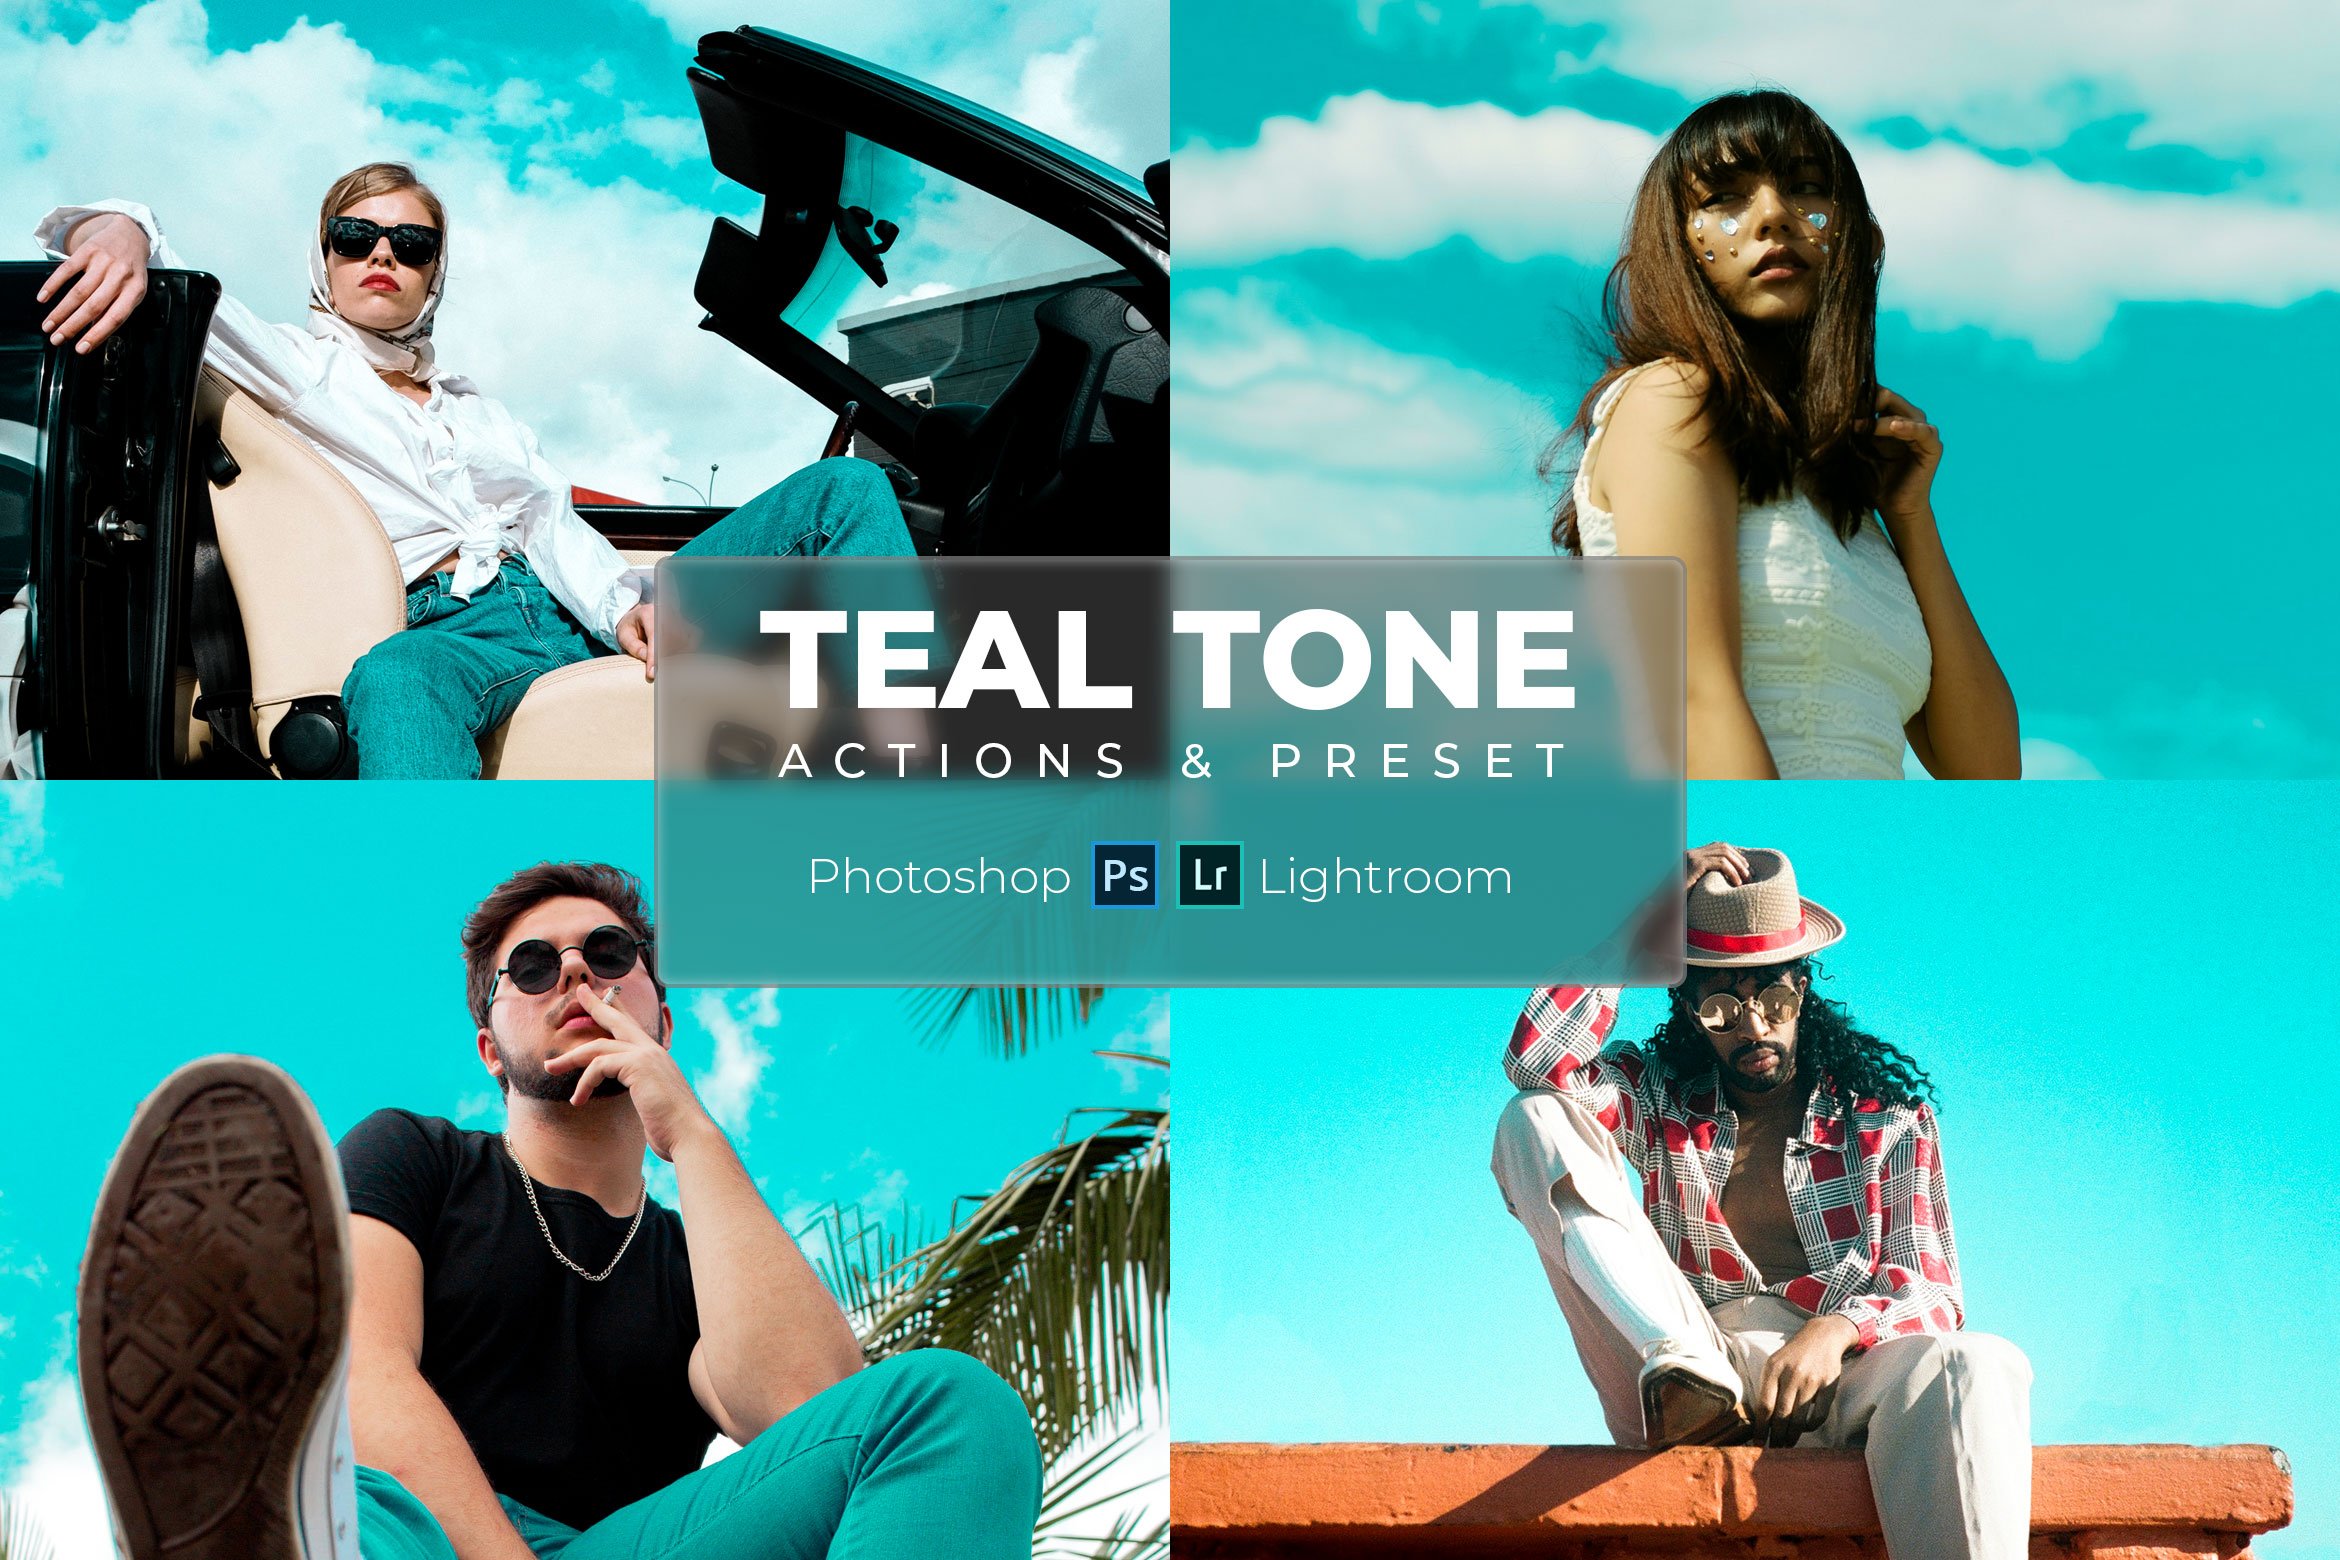 Lr Presets & Ps Actions - Teal Tonecover image.